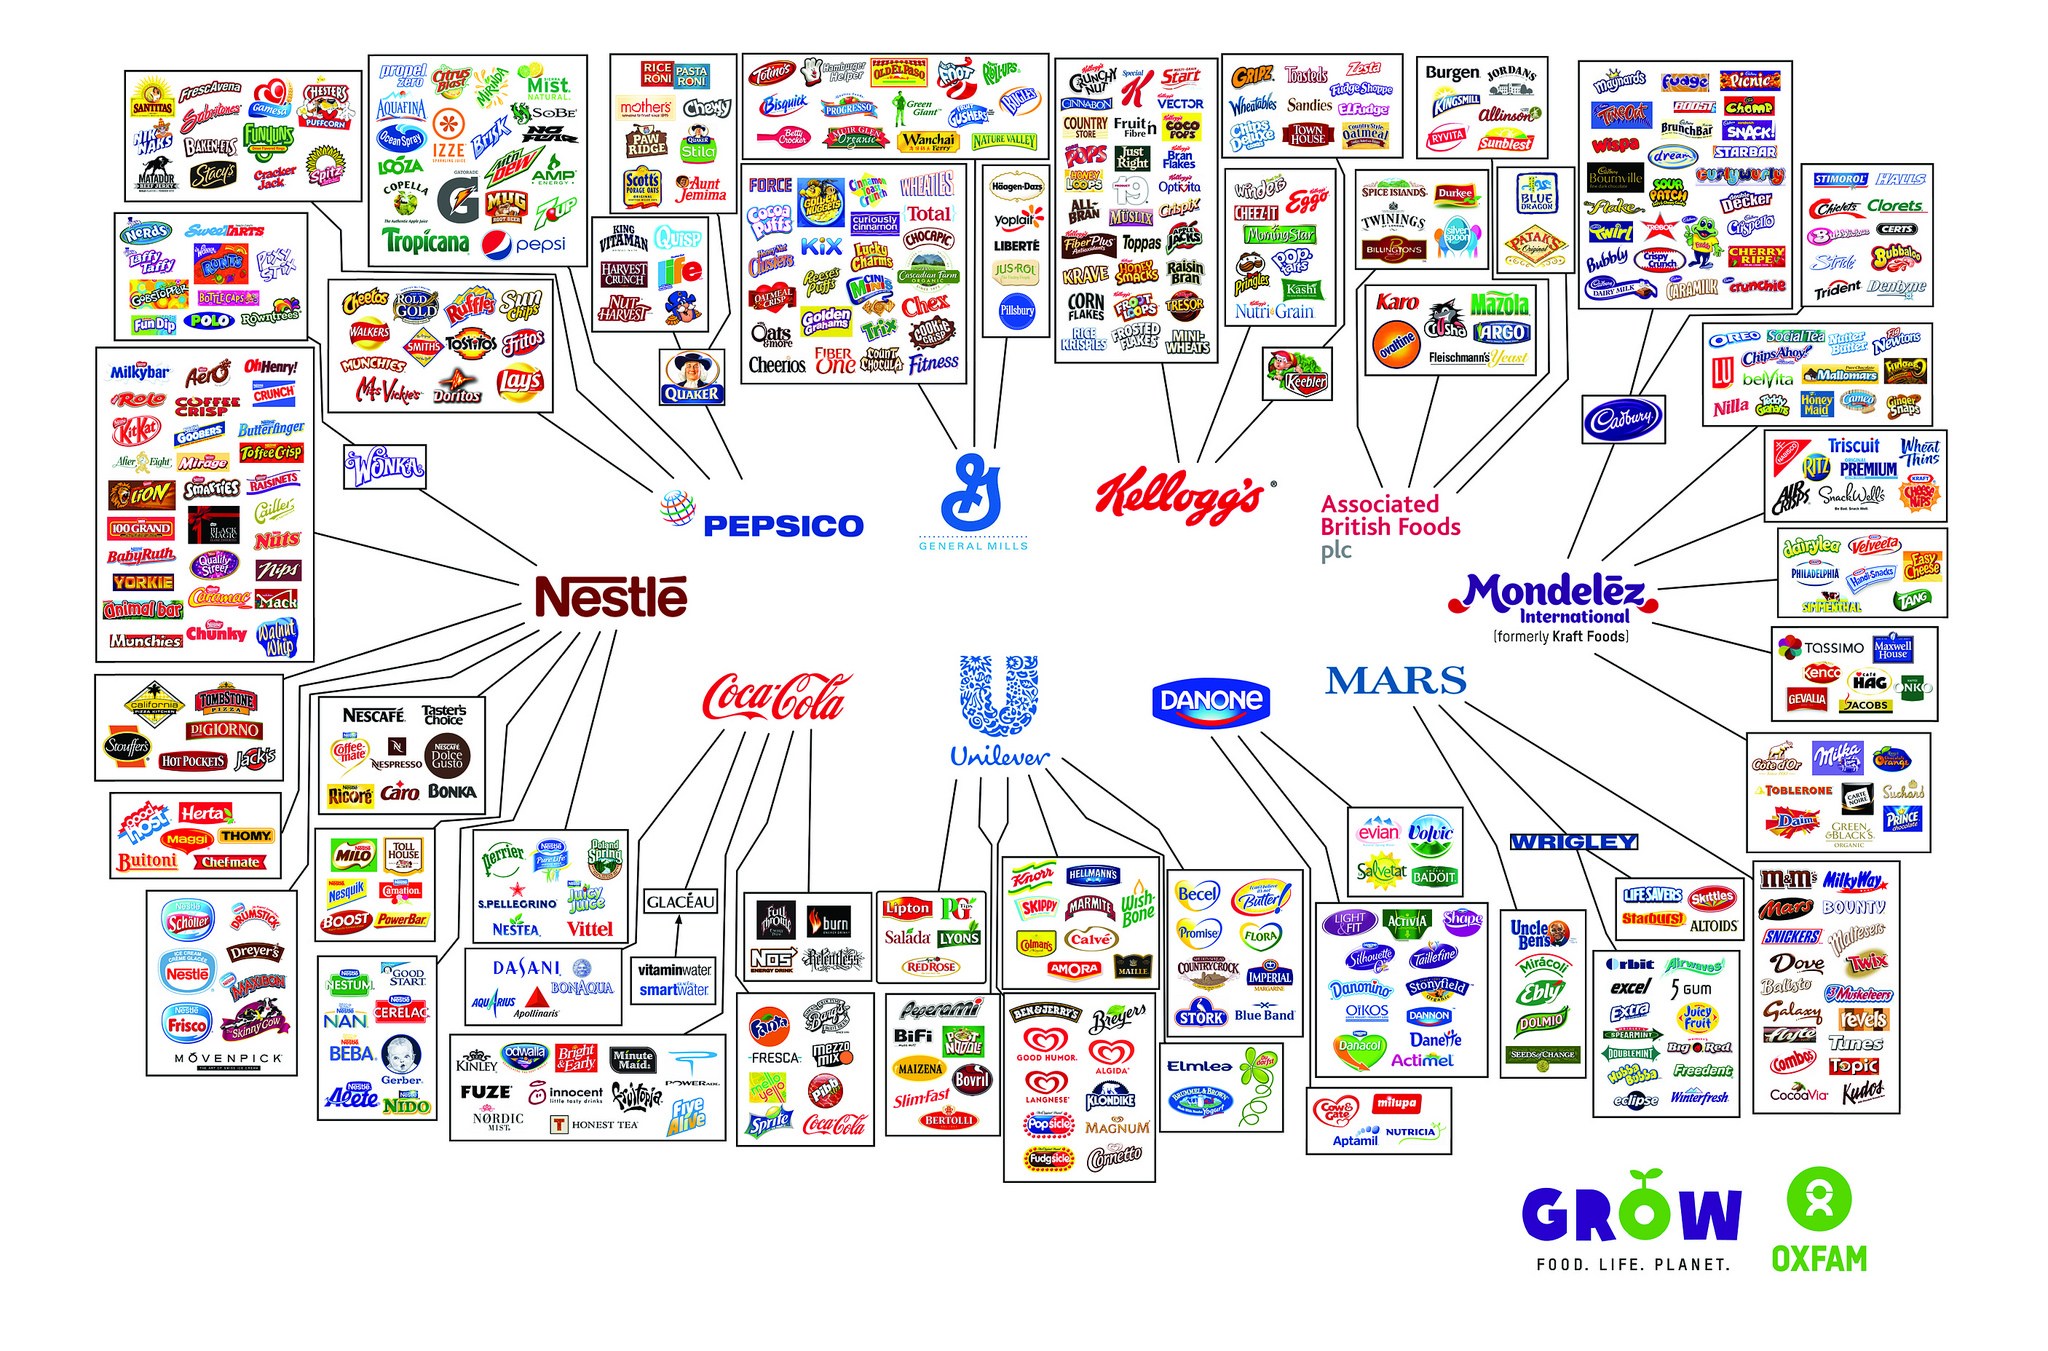 Behind-the-brands-illusion-of-choice-graphic-2048x1351-1